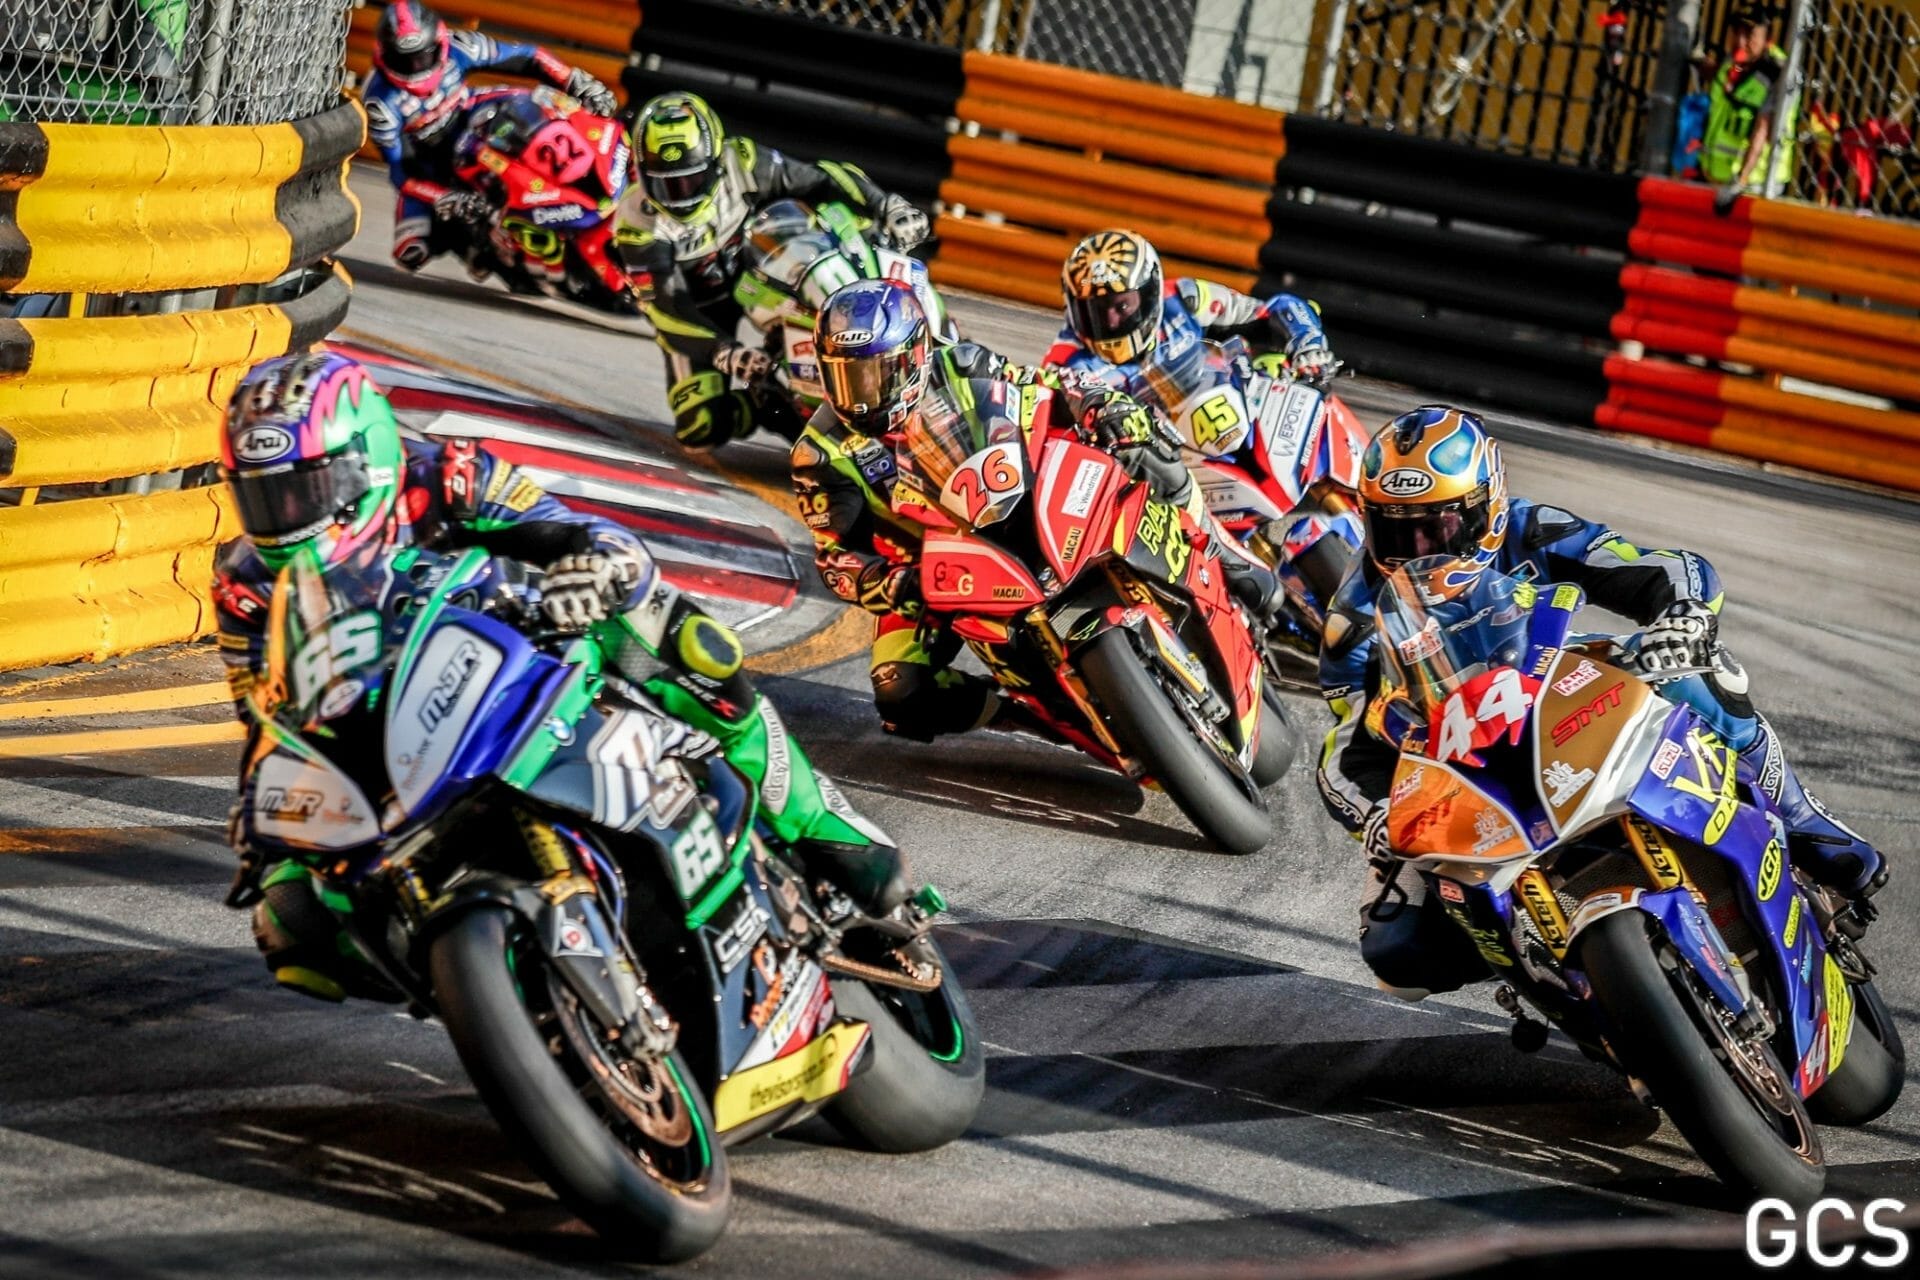 2 times red flag: No race-winner in #Macau
- also in the app Motorcycle News